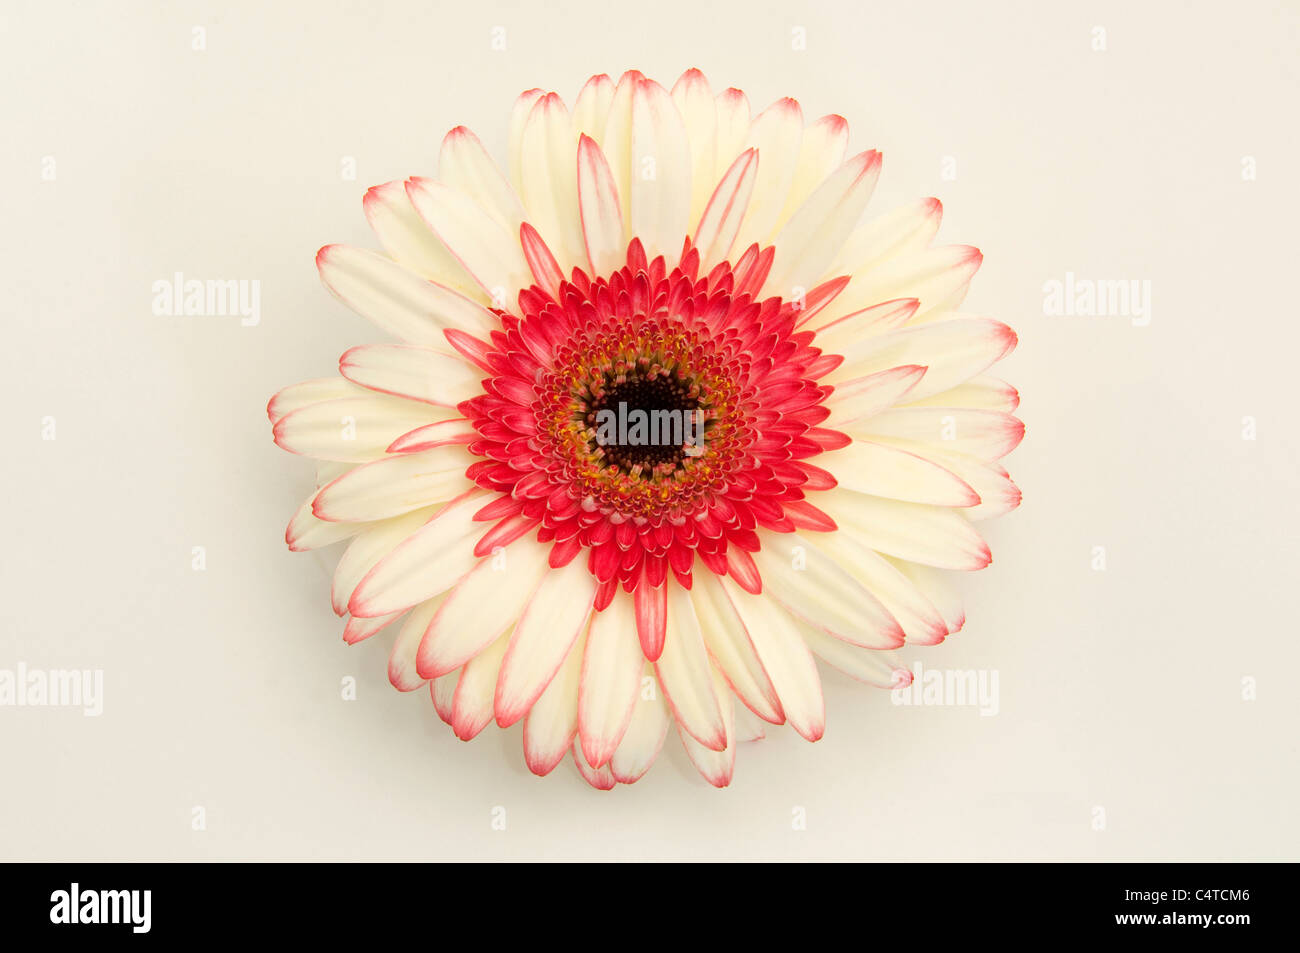 Barberton Daisy, Gerbera, Transvaal Daisy (Gerbera hybrid), white and red flower. Studio picture against a white background. Stock Photo